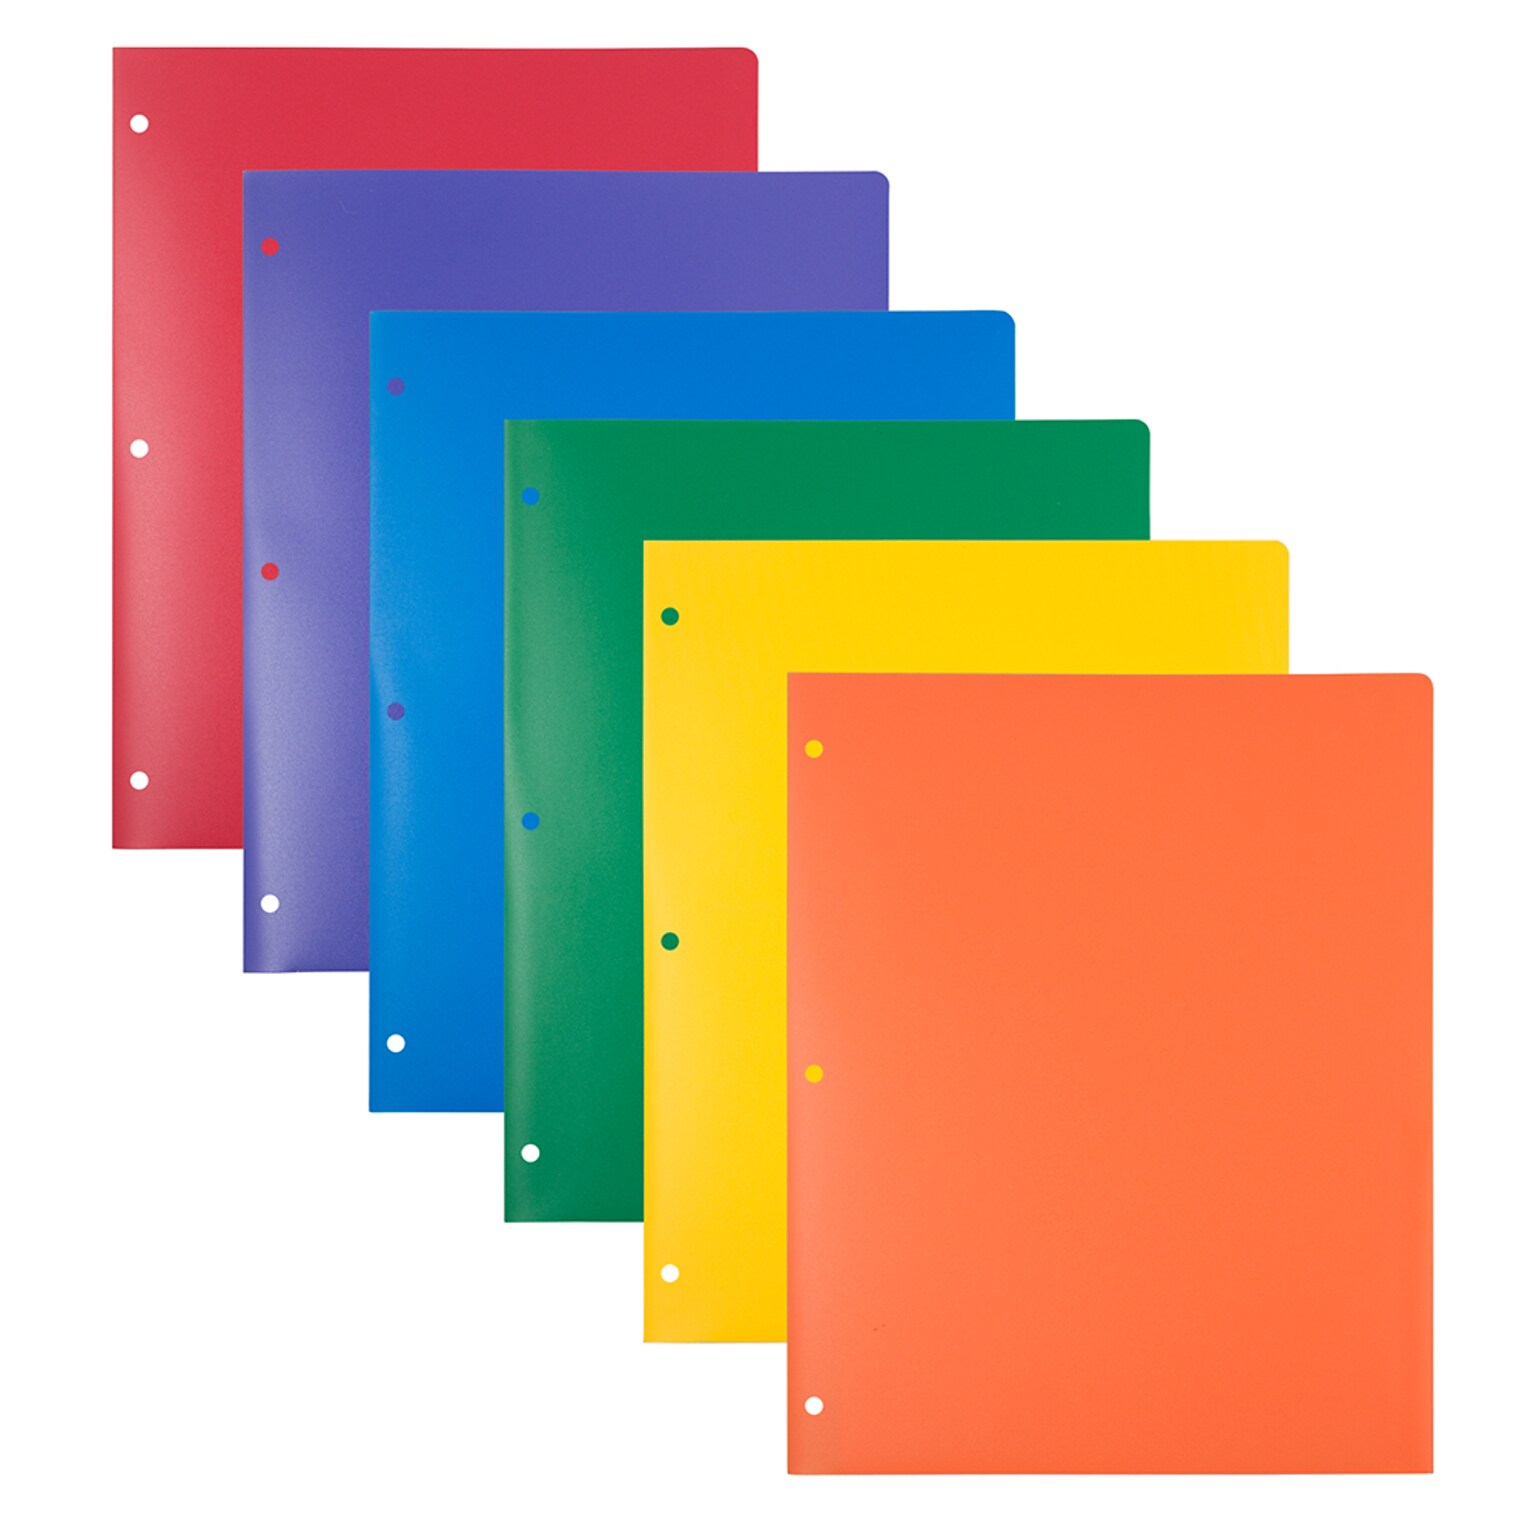 JAM Paper Heavy Duty 3-Hole Punched 2-Pocket Folder, Multicolored, Assorted Colors, 6/Pack (383HHPRGBYPBL)